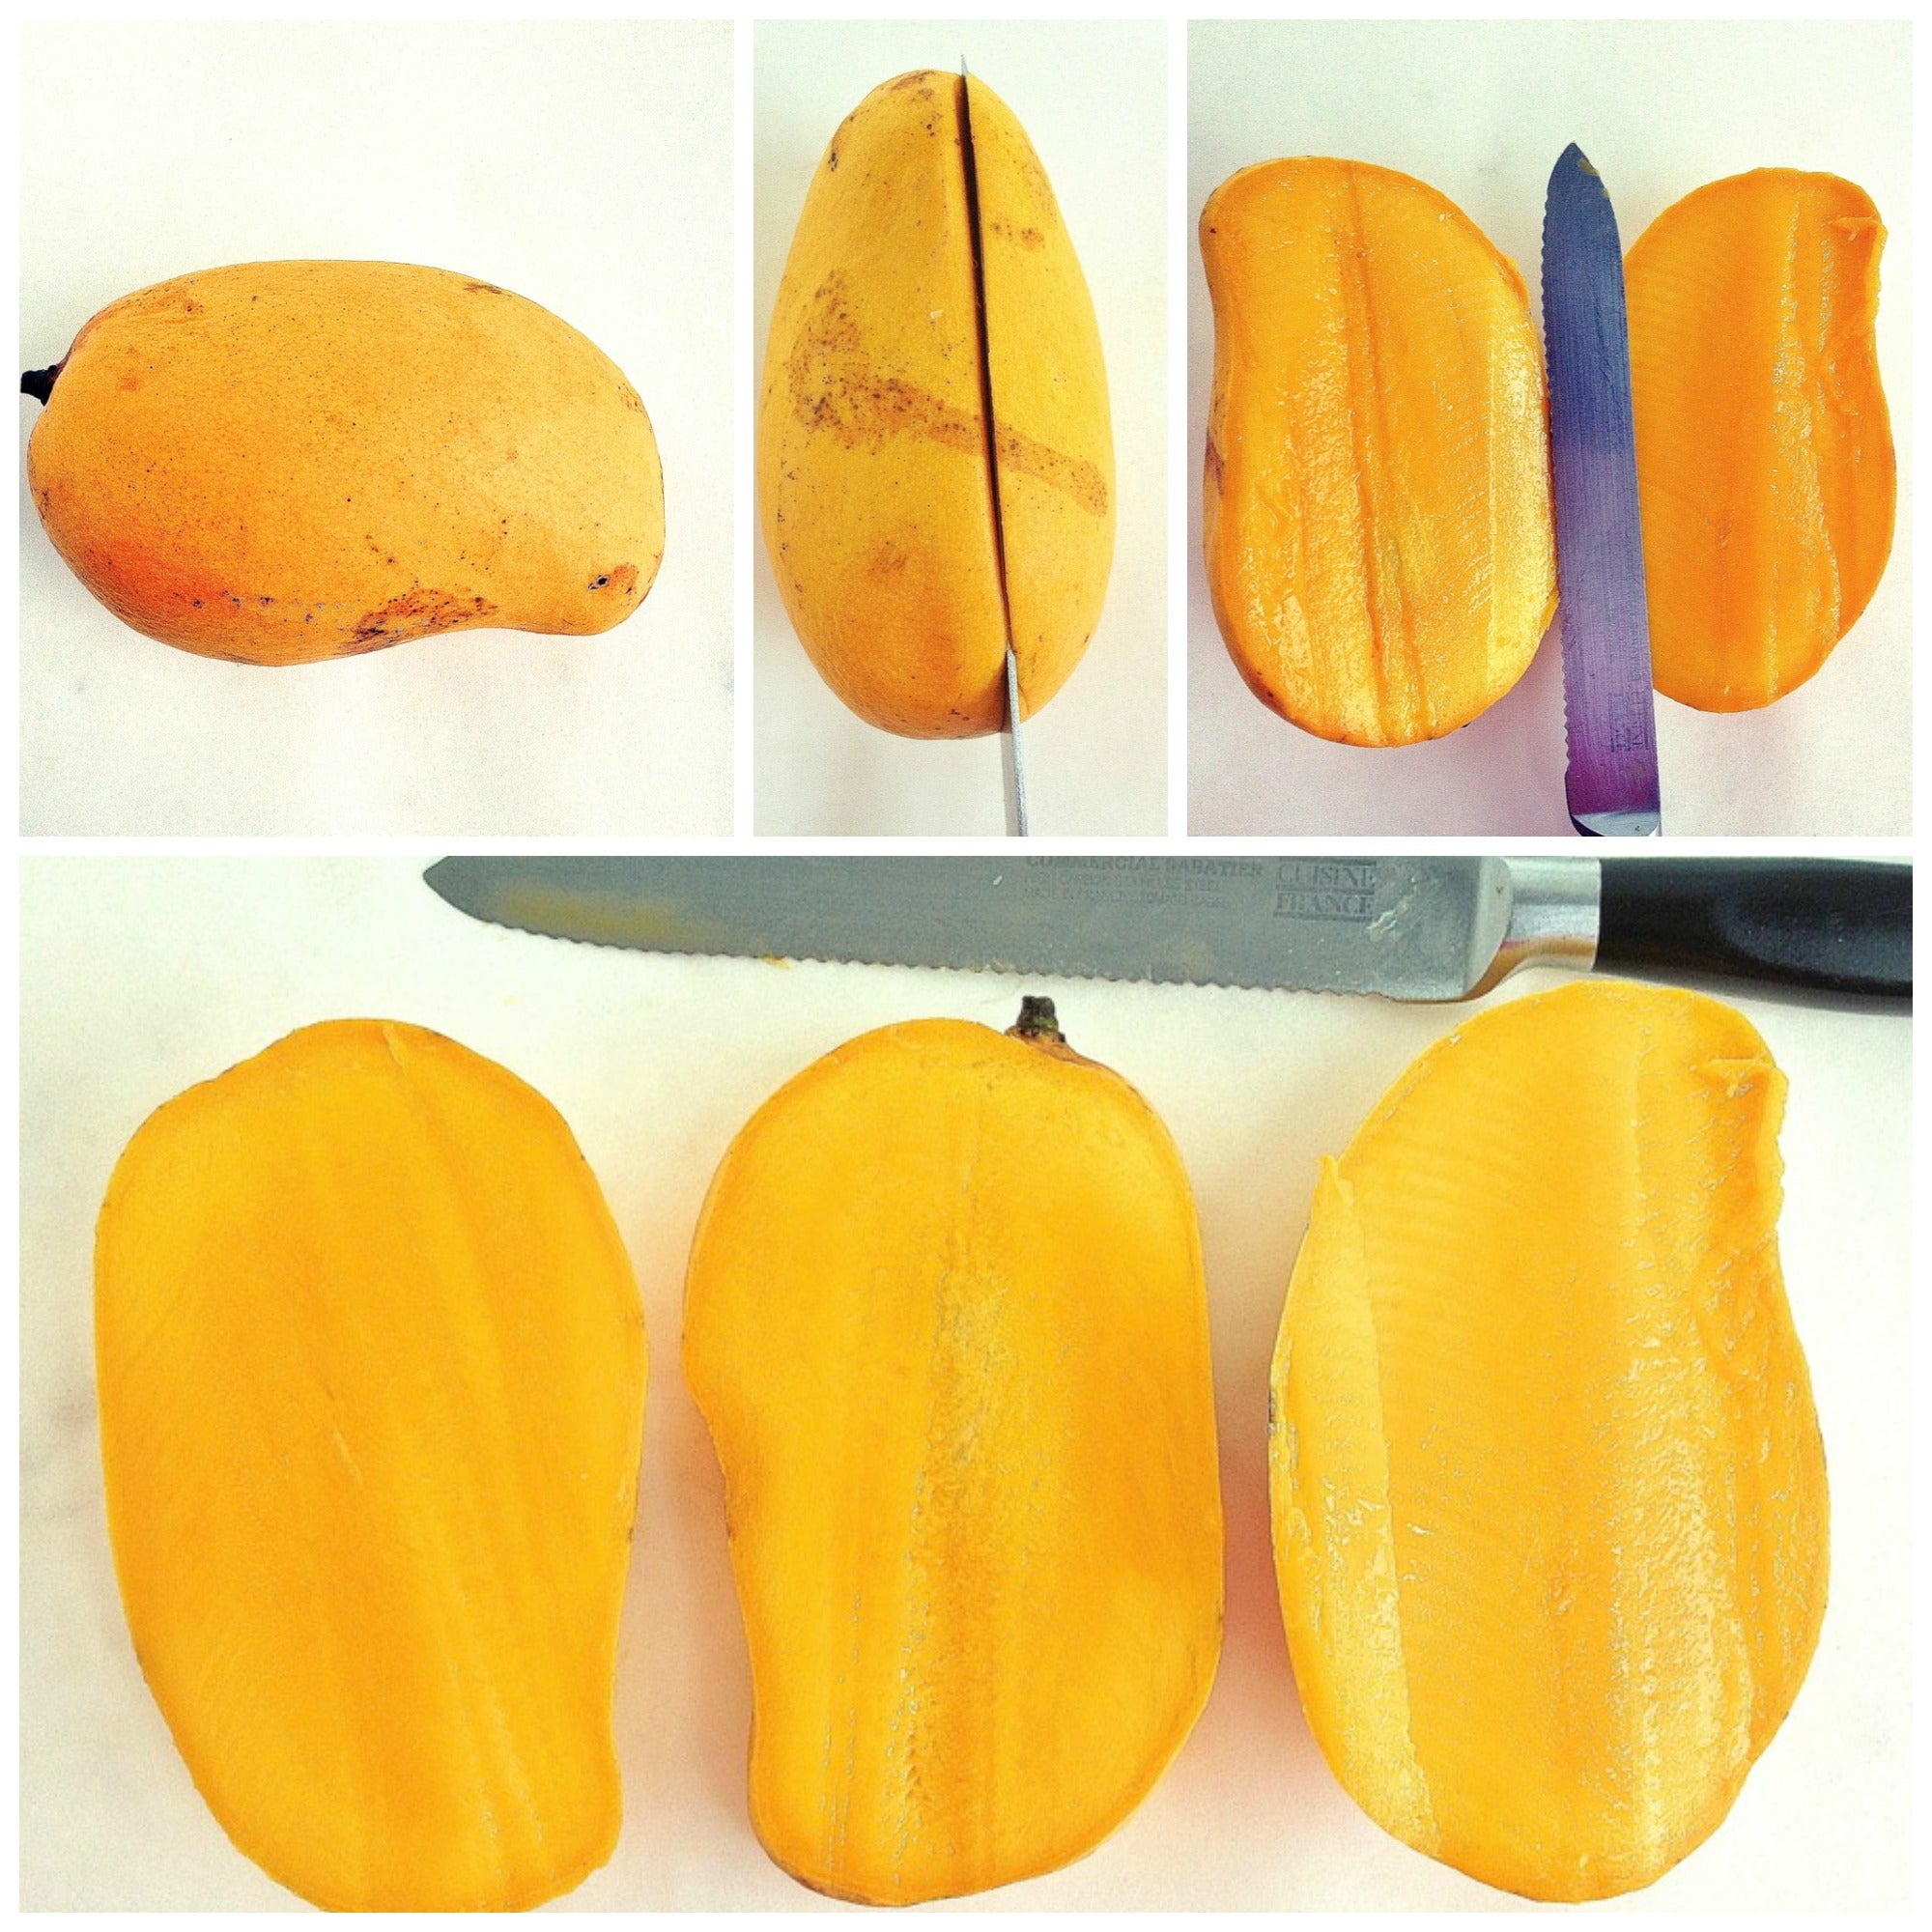 How to Cut a Mango (3 different ways!)